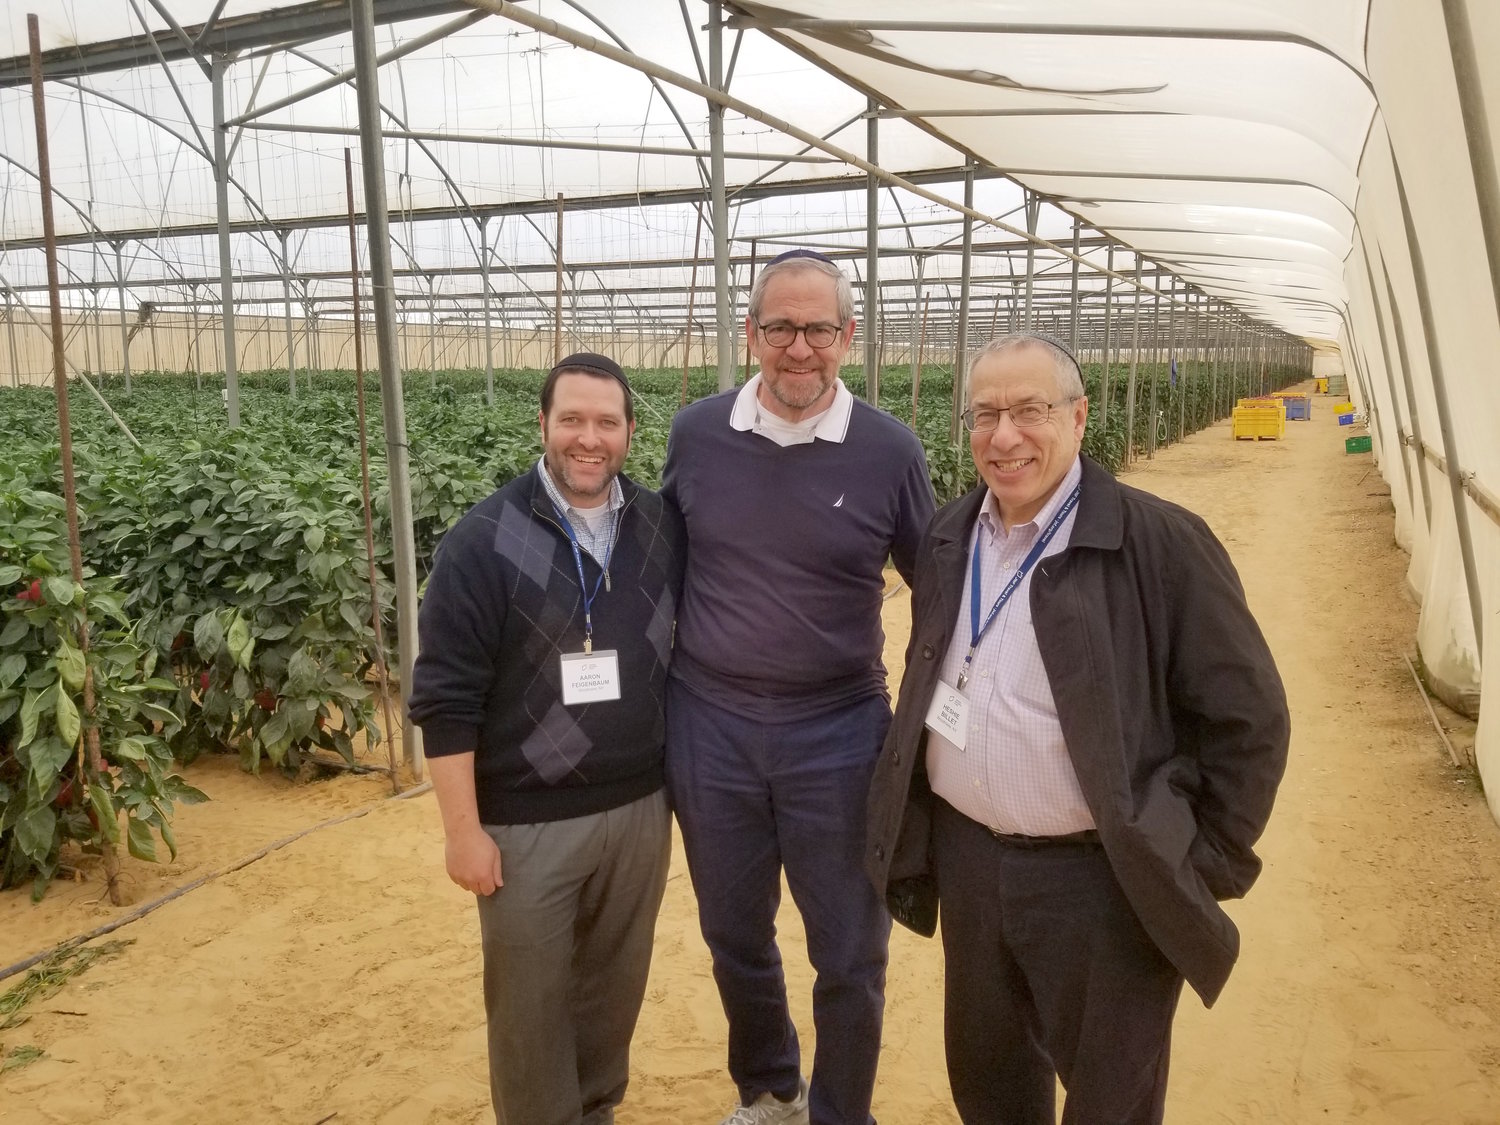 These three Five Towns rabbis visited one of the hundreds of greenhouses of the Halutza Communities along Israel’s Egyptian and Gazan borders, during a Long Island Rabbis for Israel Mission with the Jewish National Fund. Rabbis (from left) Aaron Feigenbaum of the Irving Place Minyan in Woodmere, Kenneth Hain of Congregation Beth Sholom in Lawrence, and Hershel Billet of the Young Israel of Woodmere also planted trees in the Neot Kedumim Biblical Forest, an iconic symbol of JNF’s work over the past century.